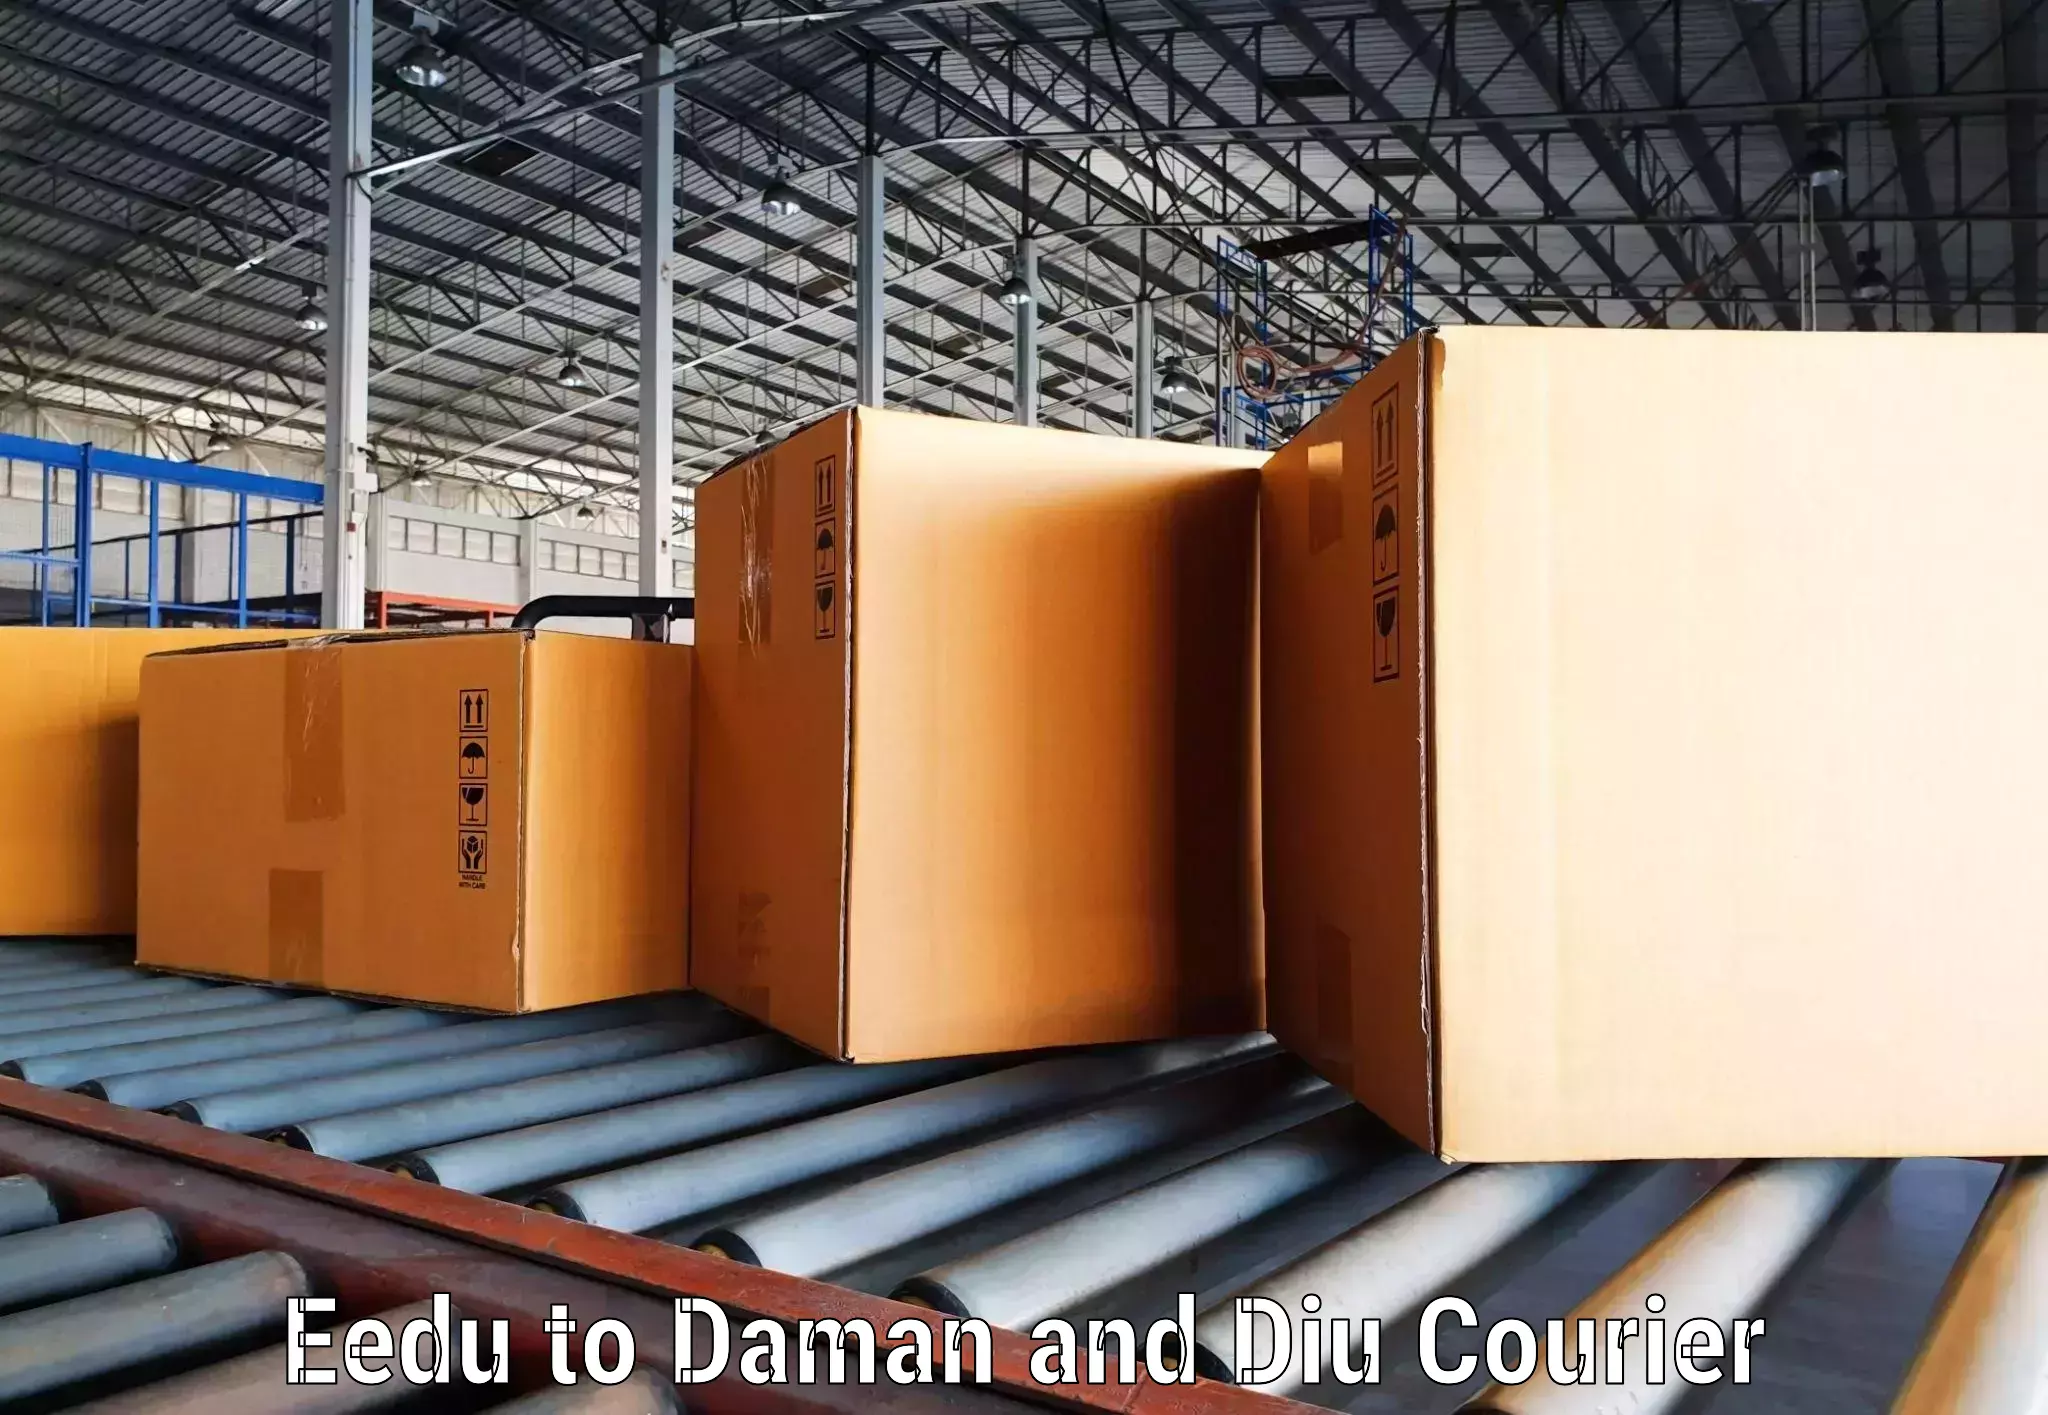 Subscription-based courier Eedu to Daman